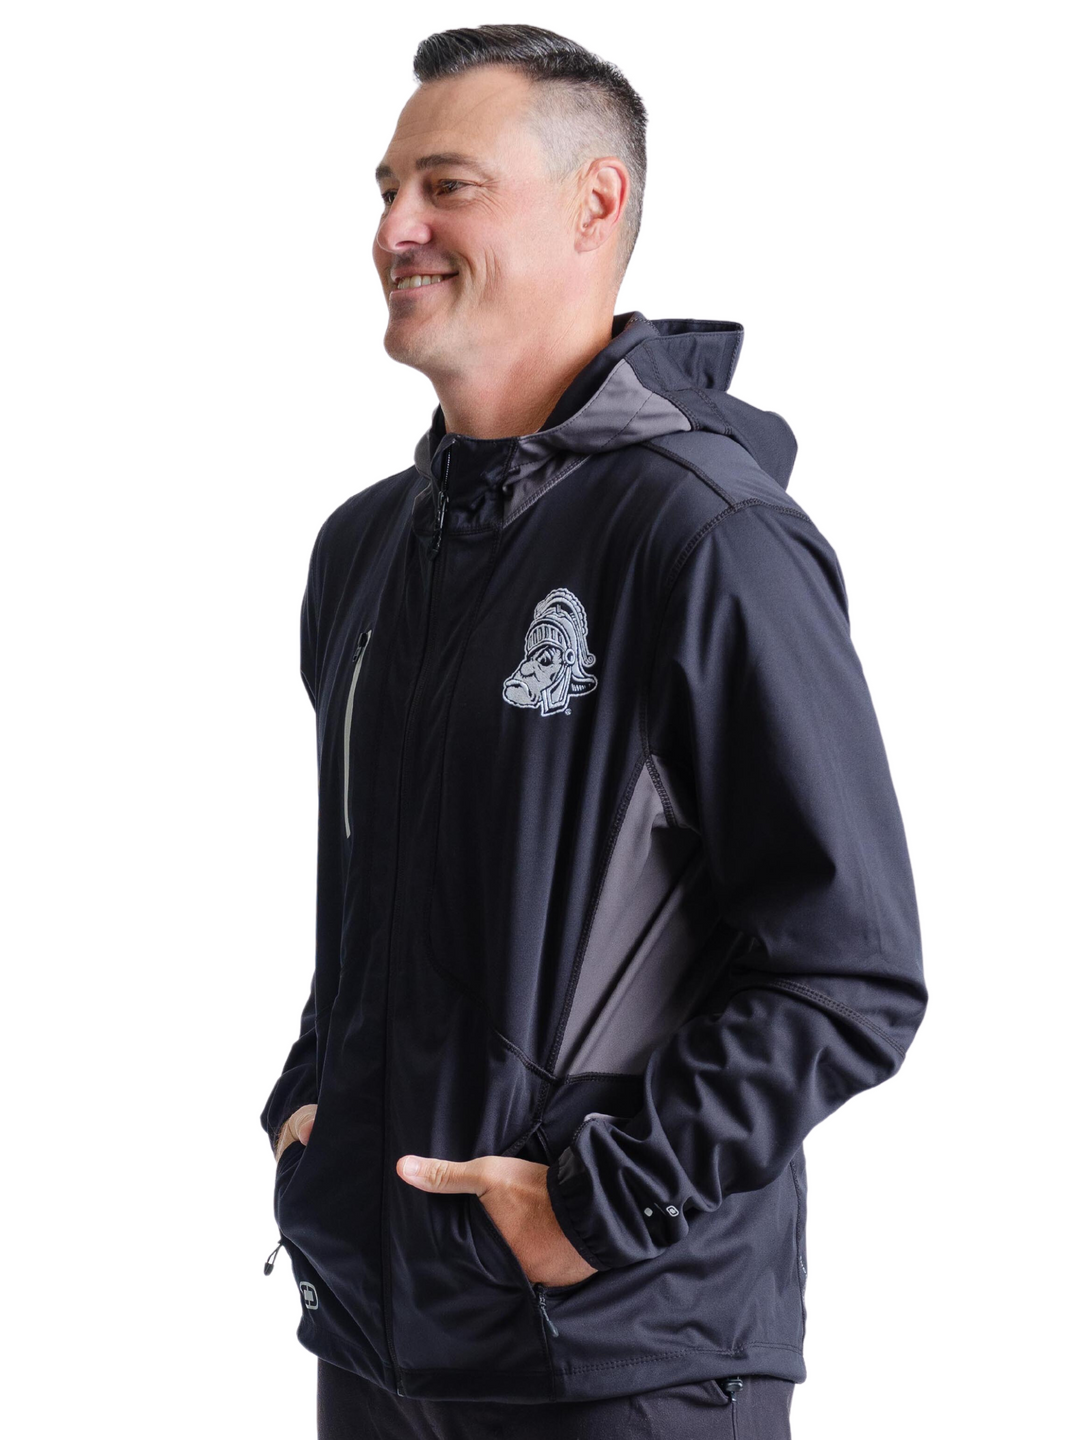 Hooded Michigan State Jacket on Male Model